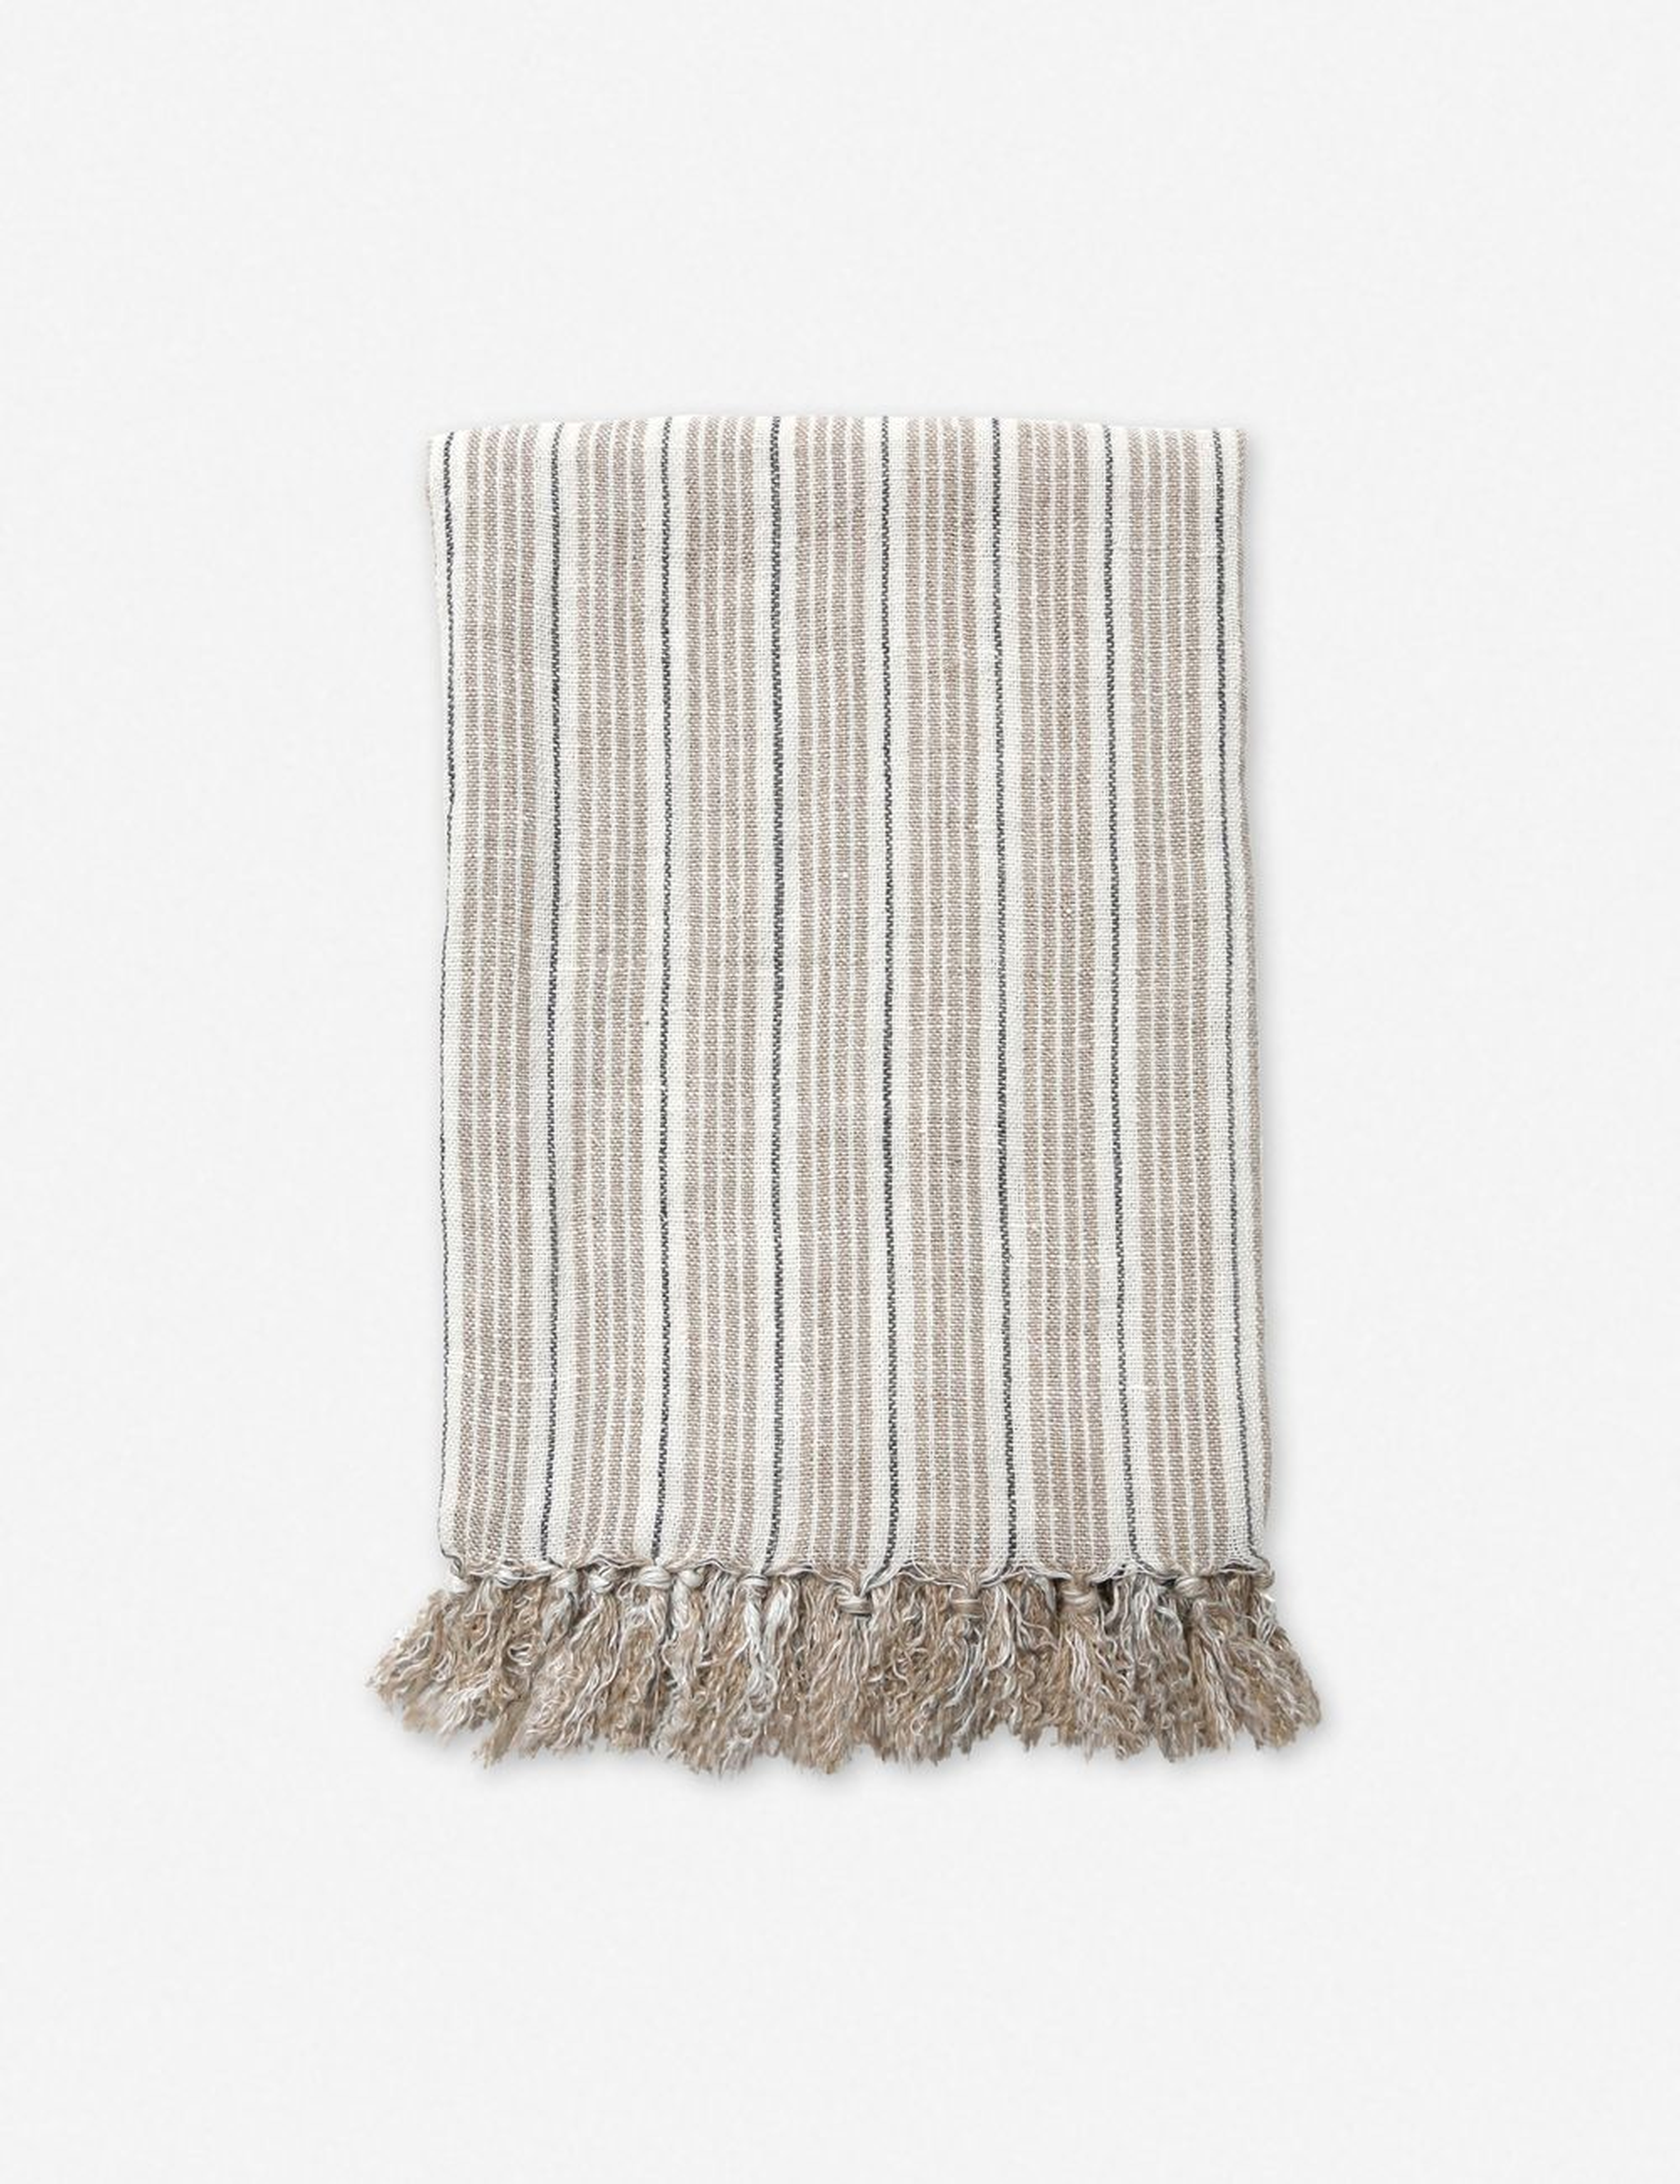 Newport Linen Throw by Pom Pom at Home - Lulu and Georgia